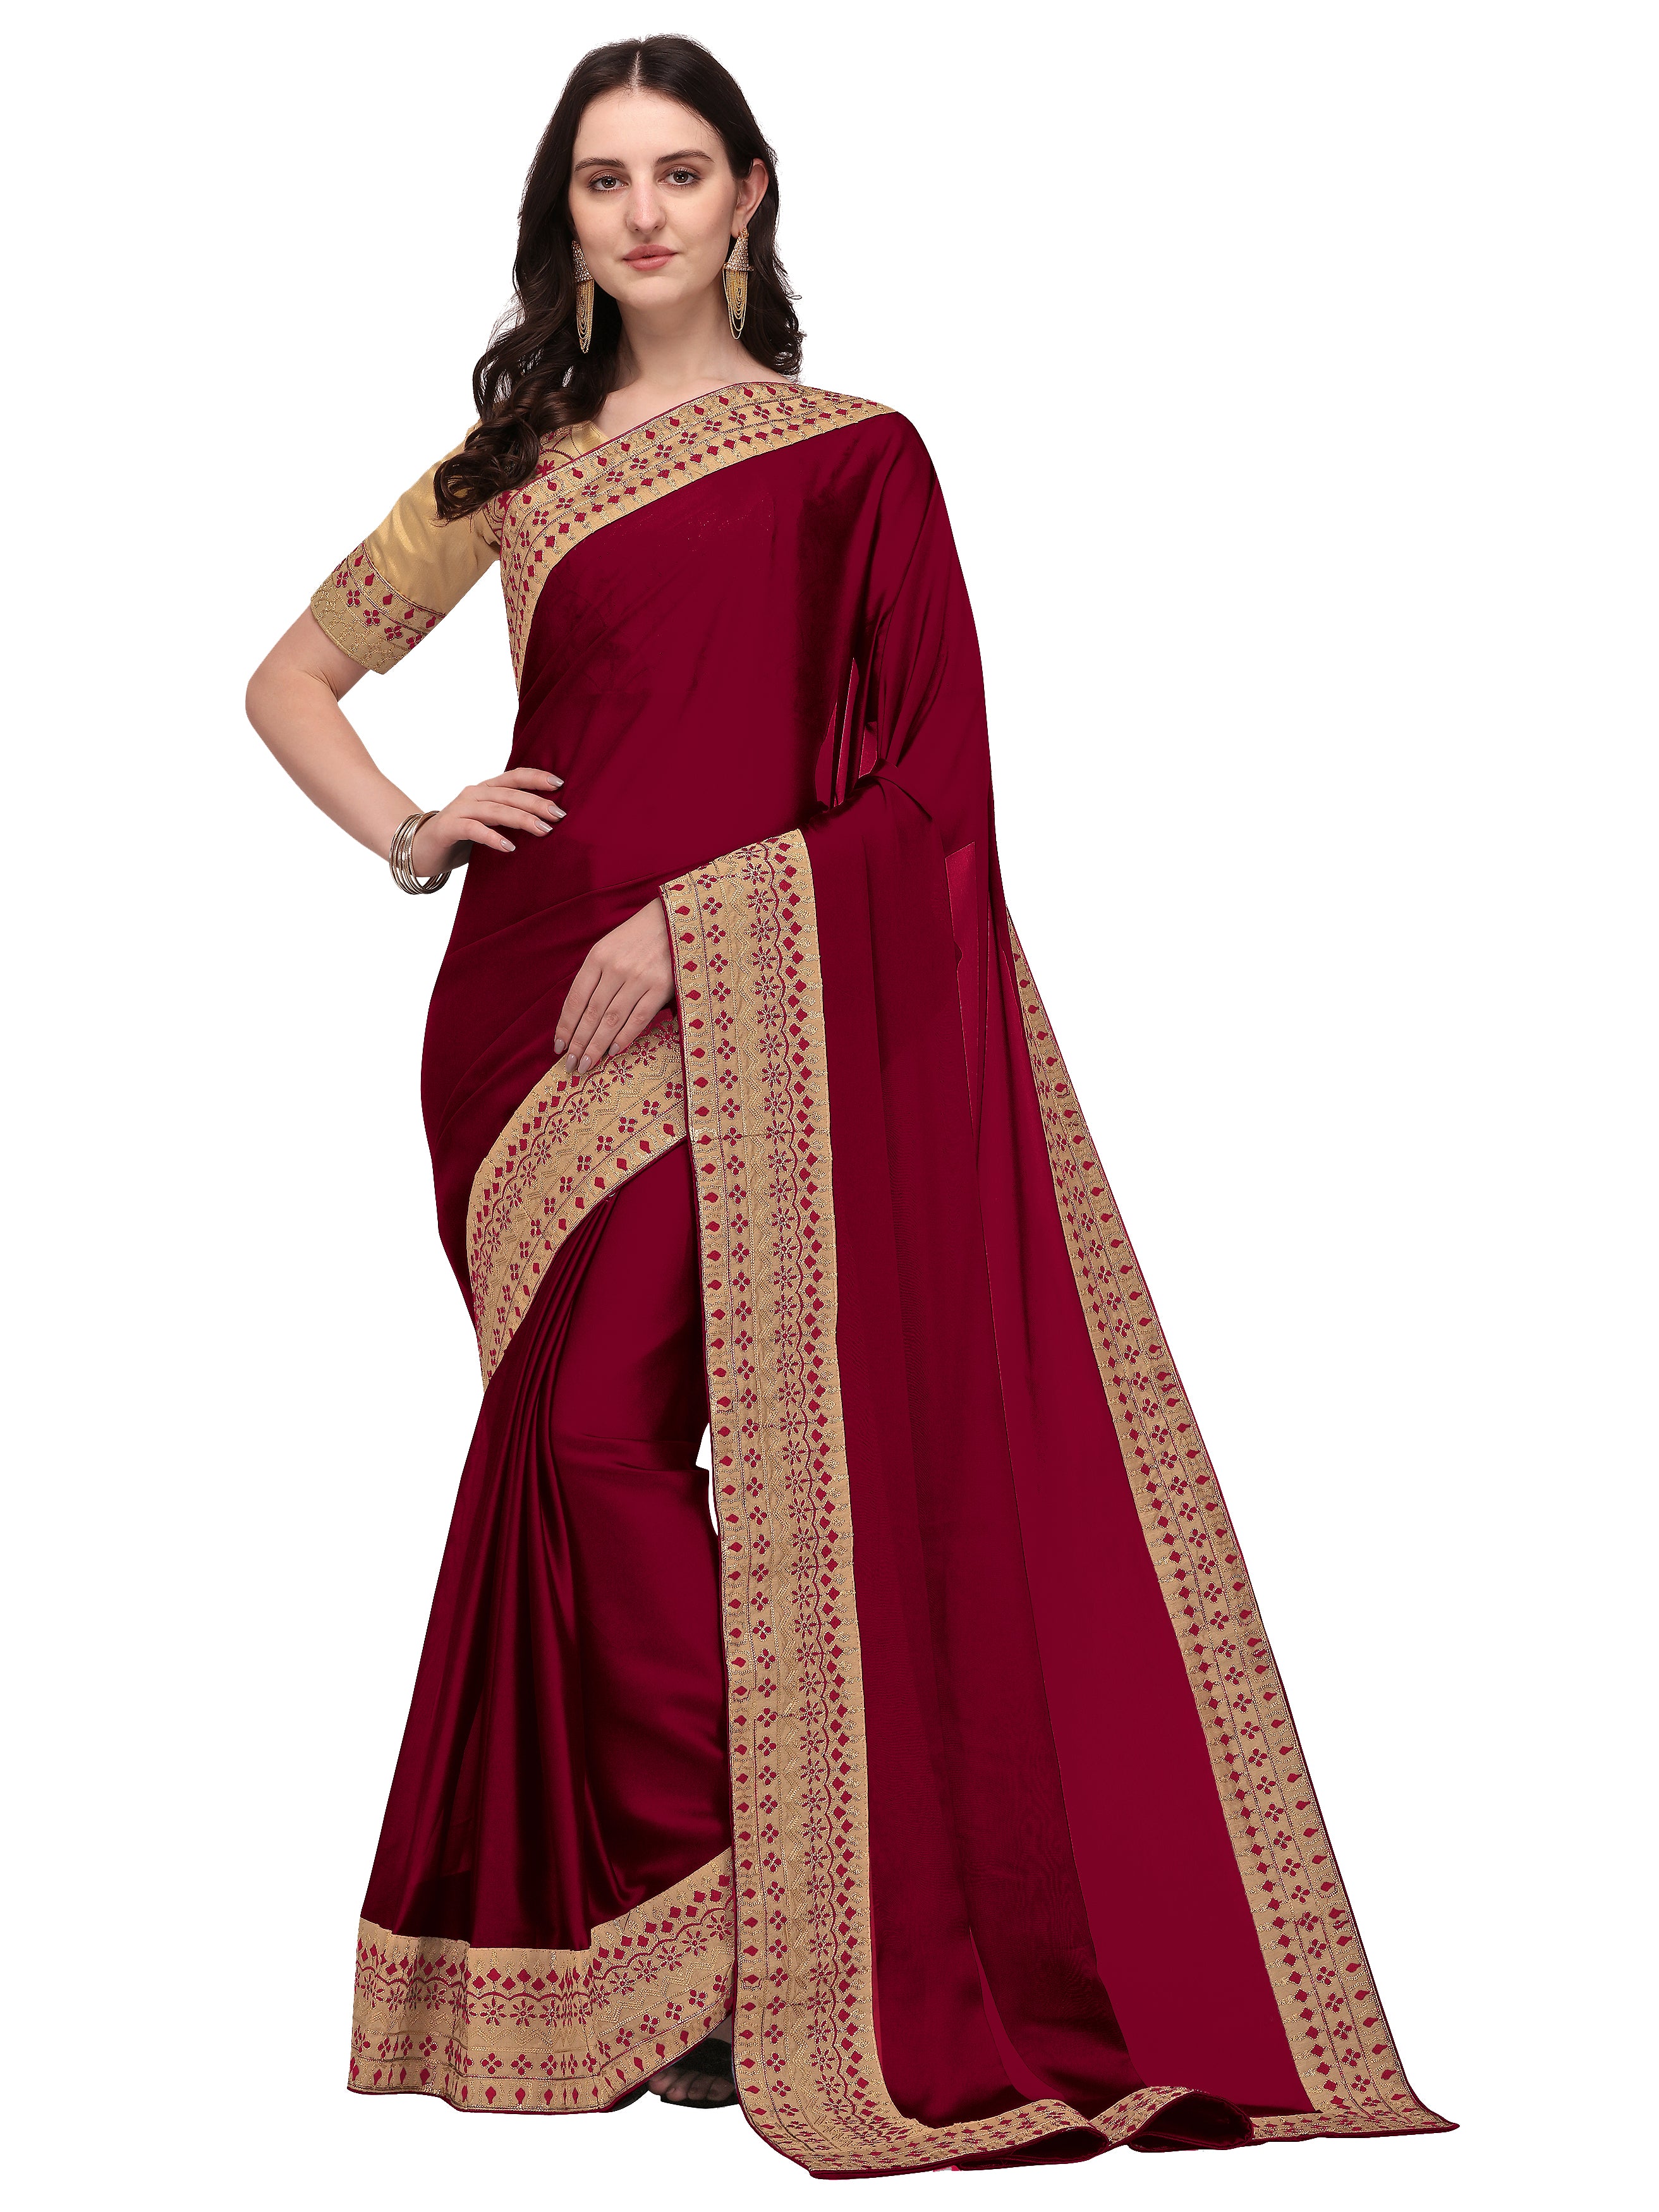 Women's self Woven Solid Occasion Wear Cotton Silk Embroided Heavy Border Sari With Blouse Piece (Maroon) - NIMIDHYA